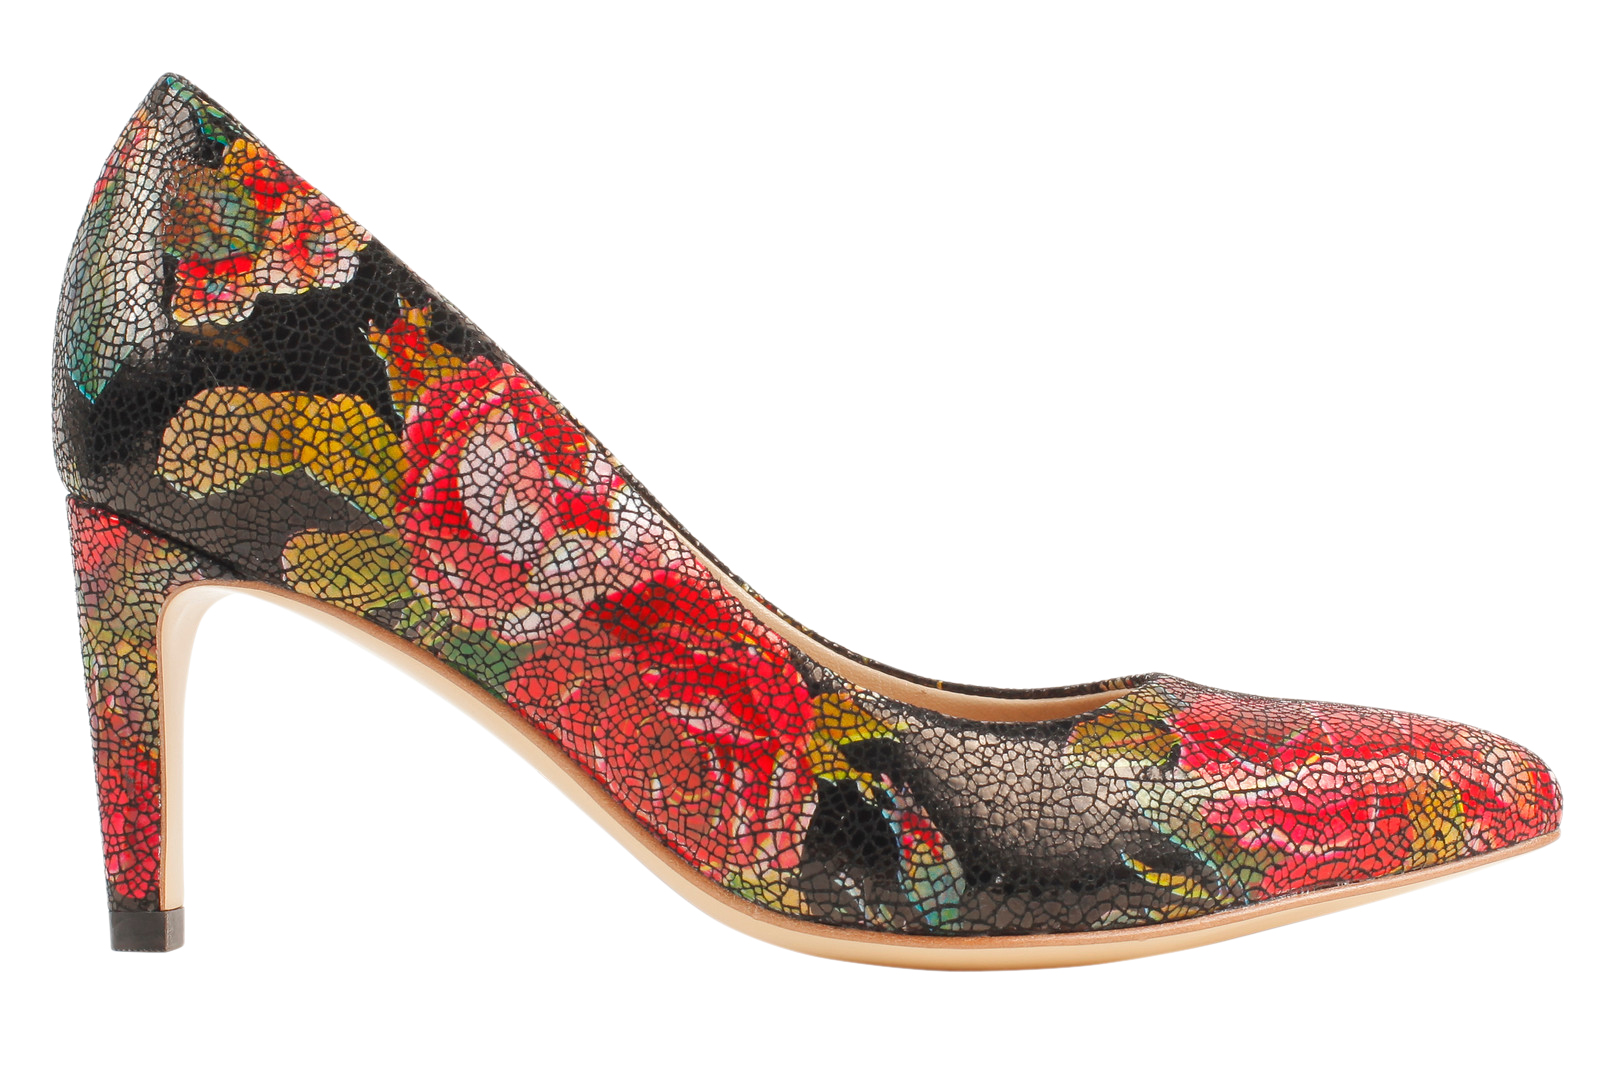 The New MARILYN Floral Pumps by UKIES